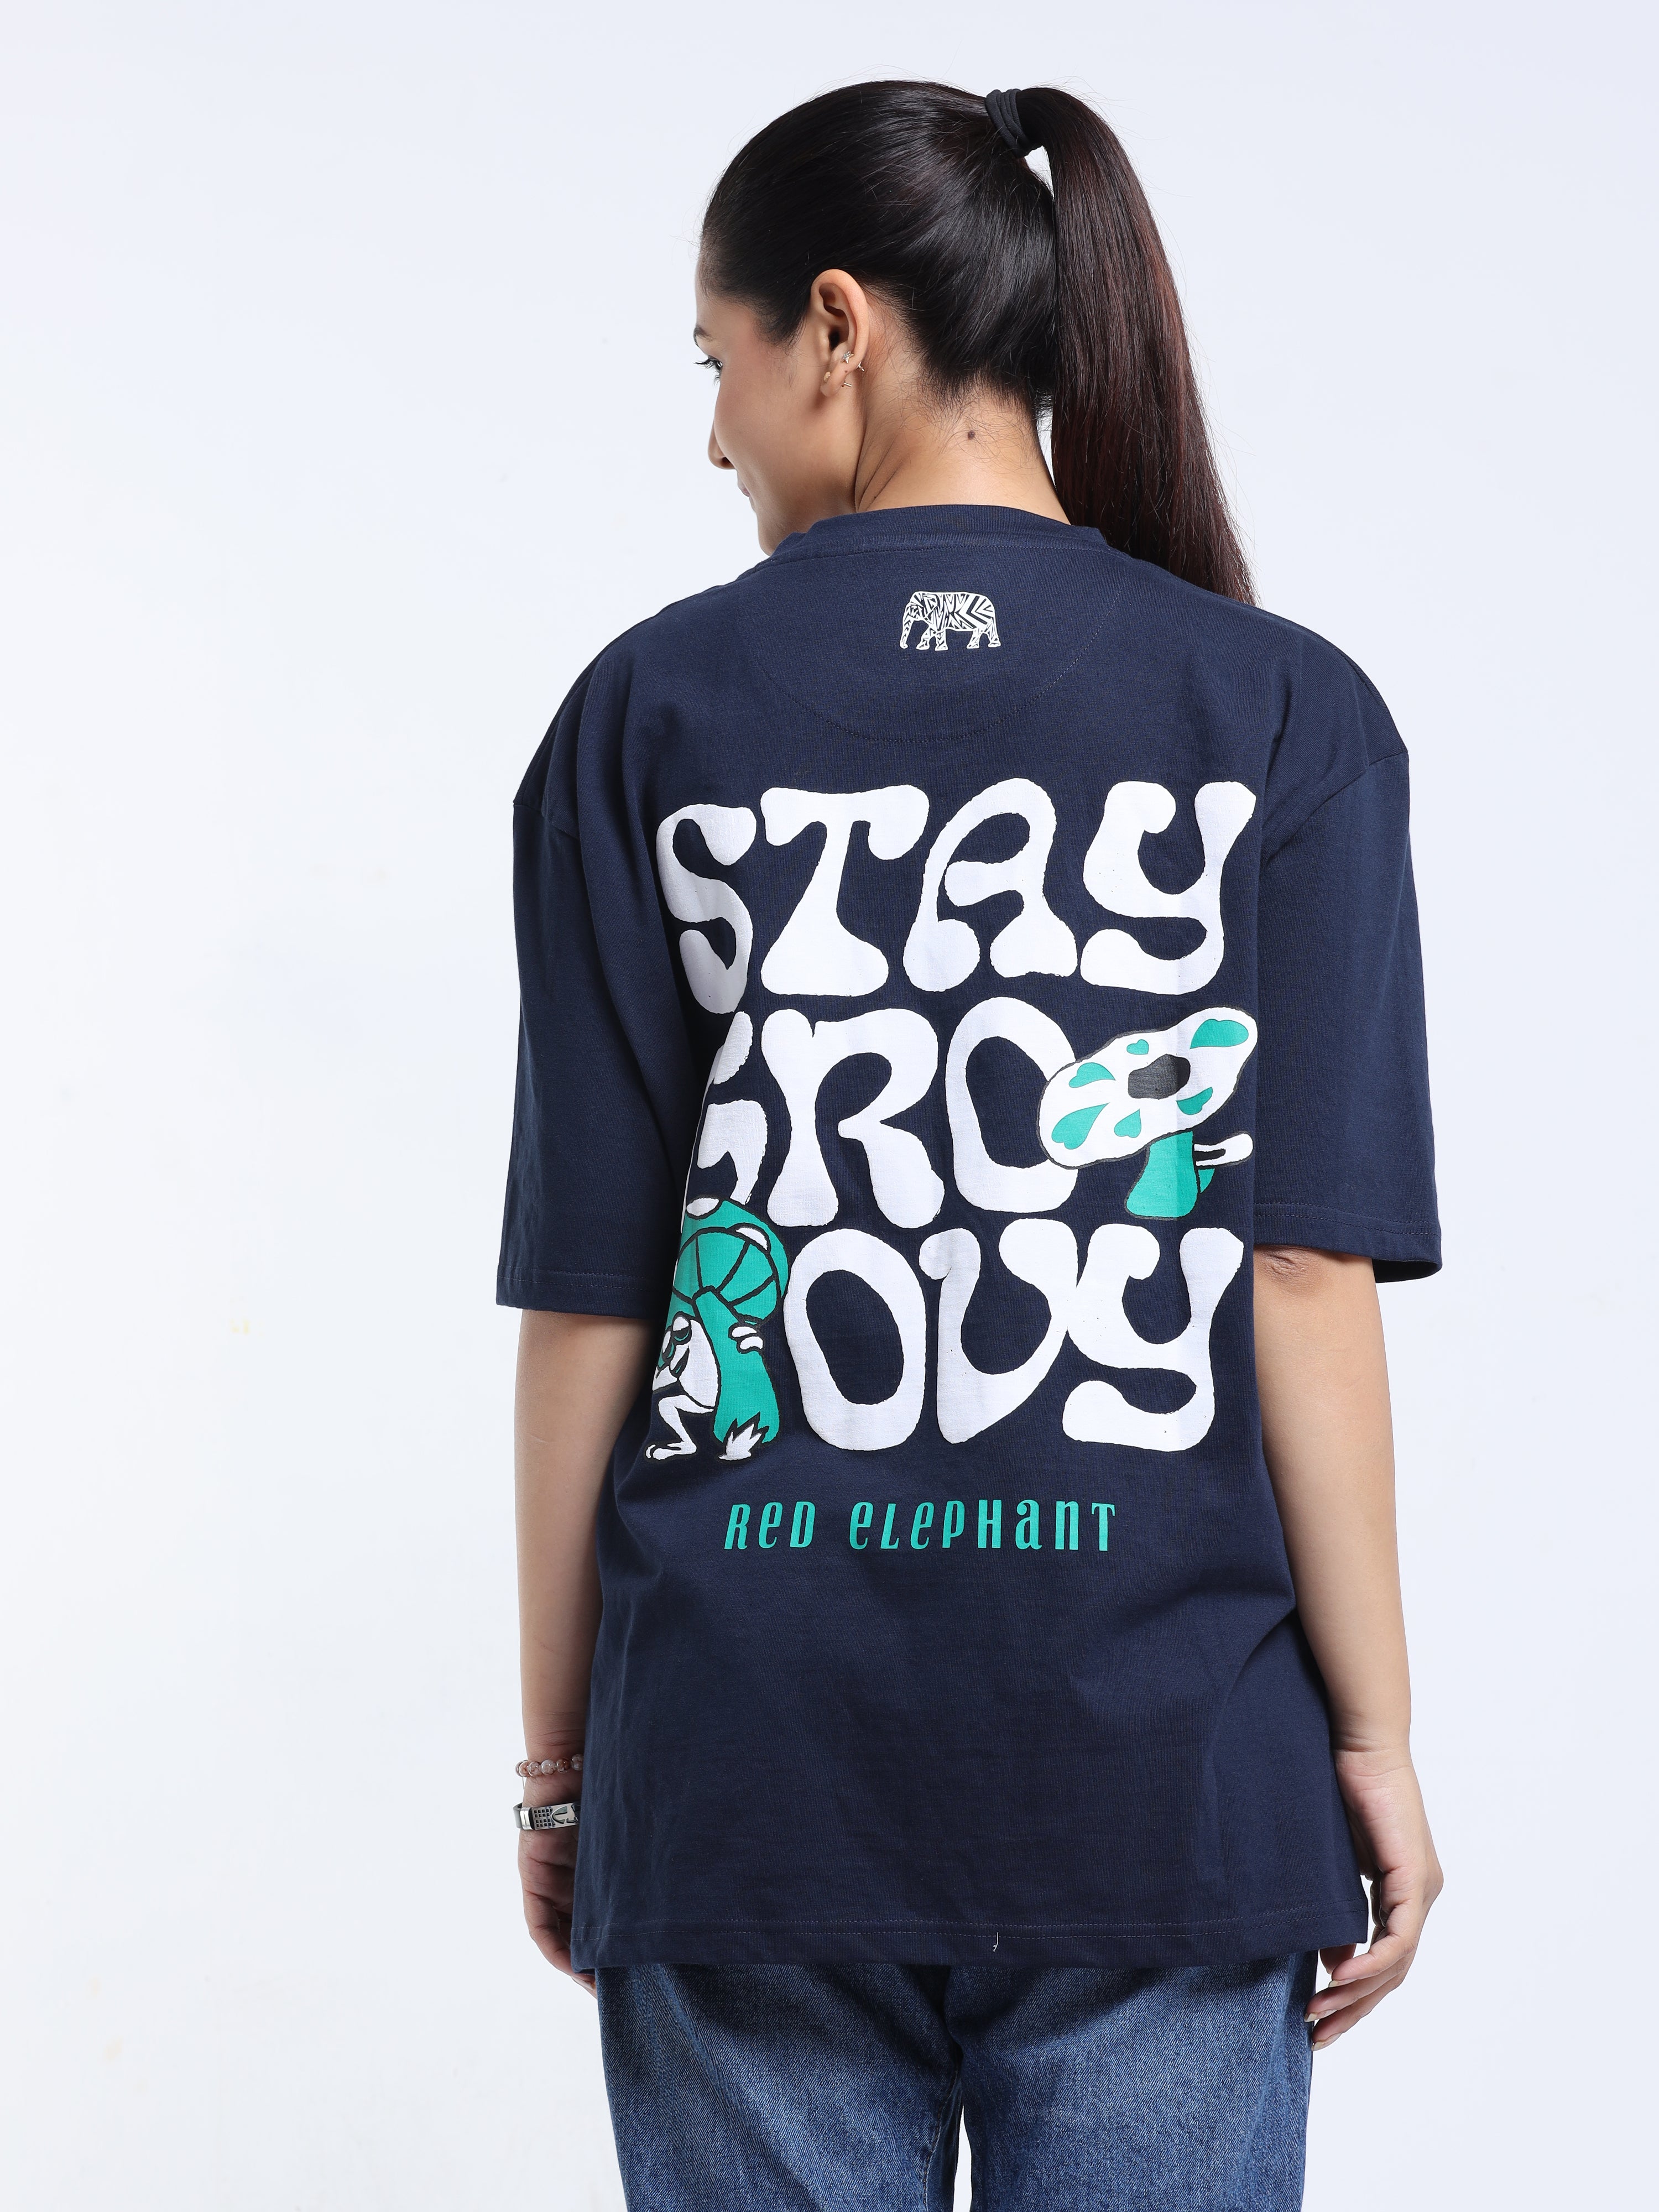 STAY GROOVY T-SHIRT